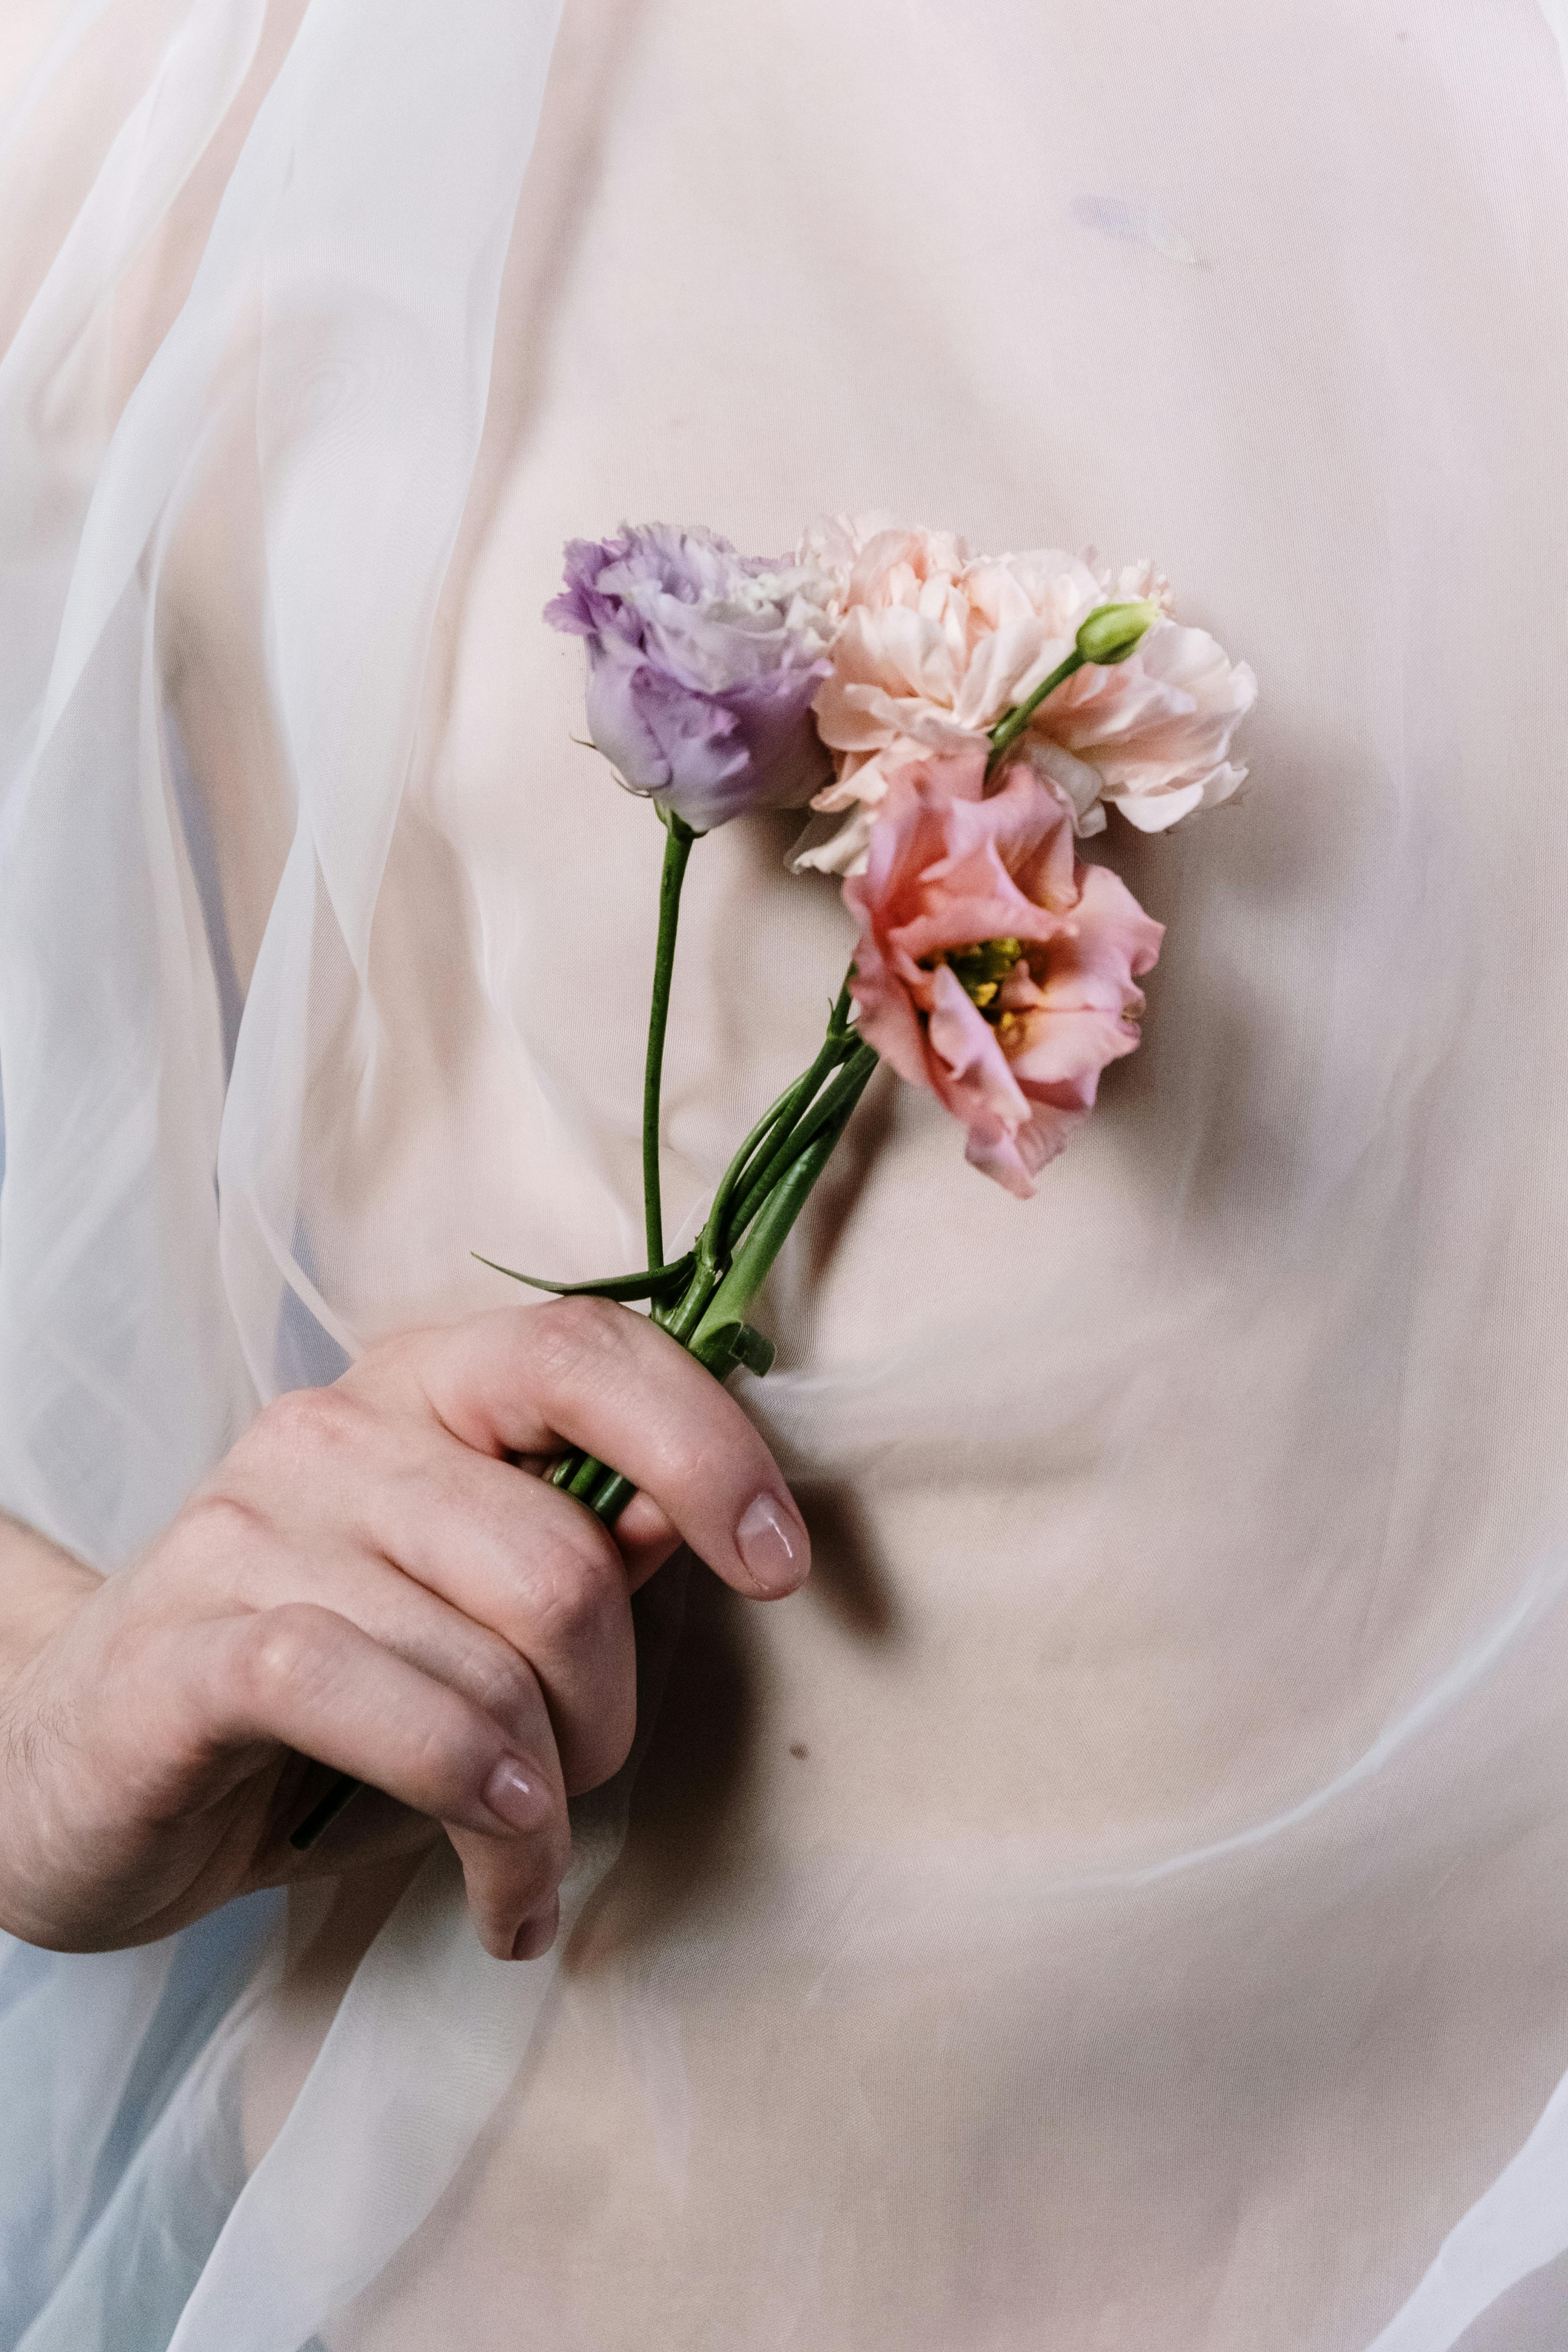 person holding white and pink flower bouquet